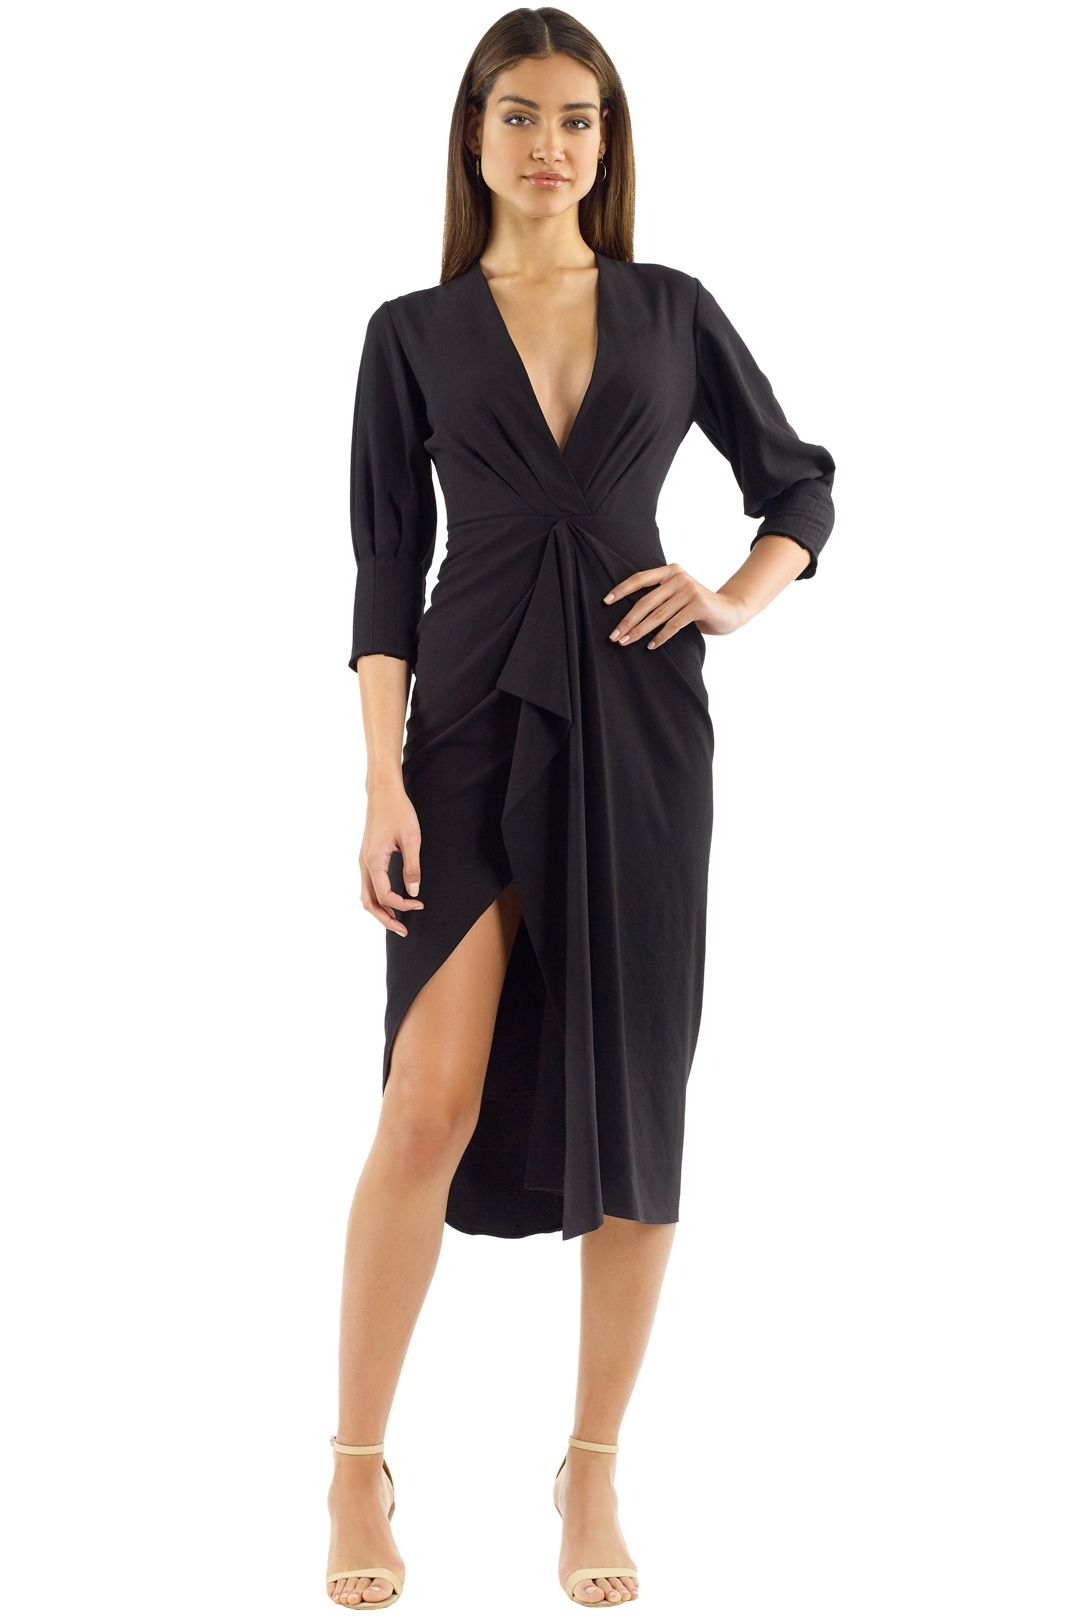 Free Fall Dress in Black by Manning Cartell for Rent